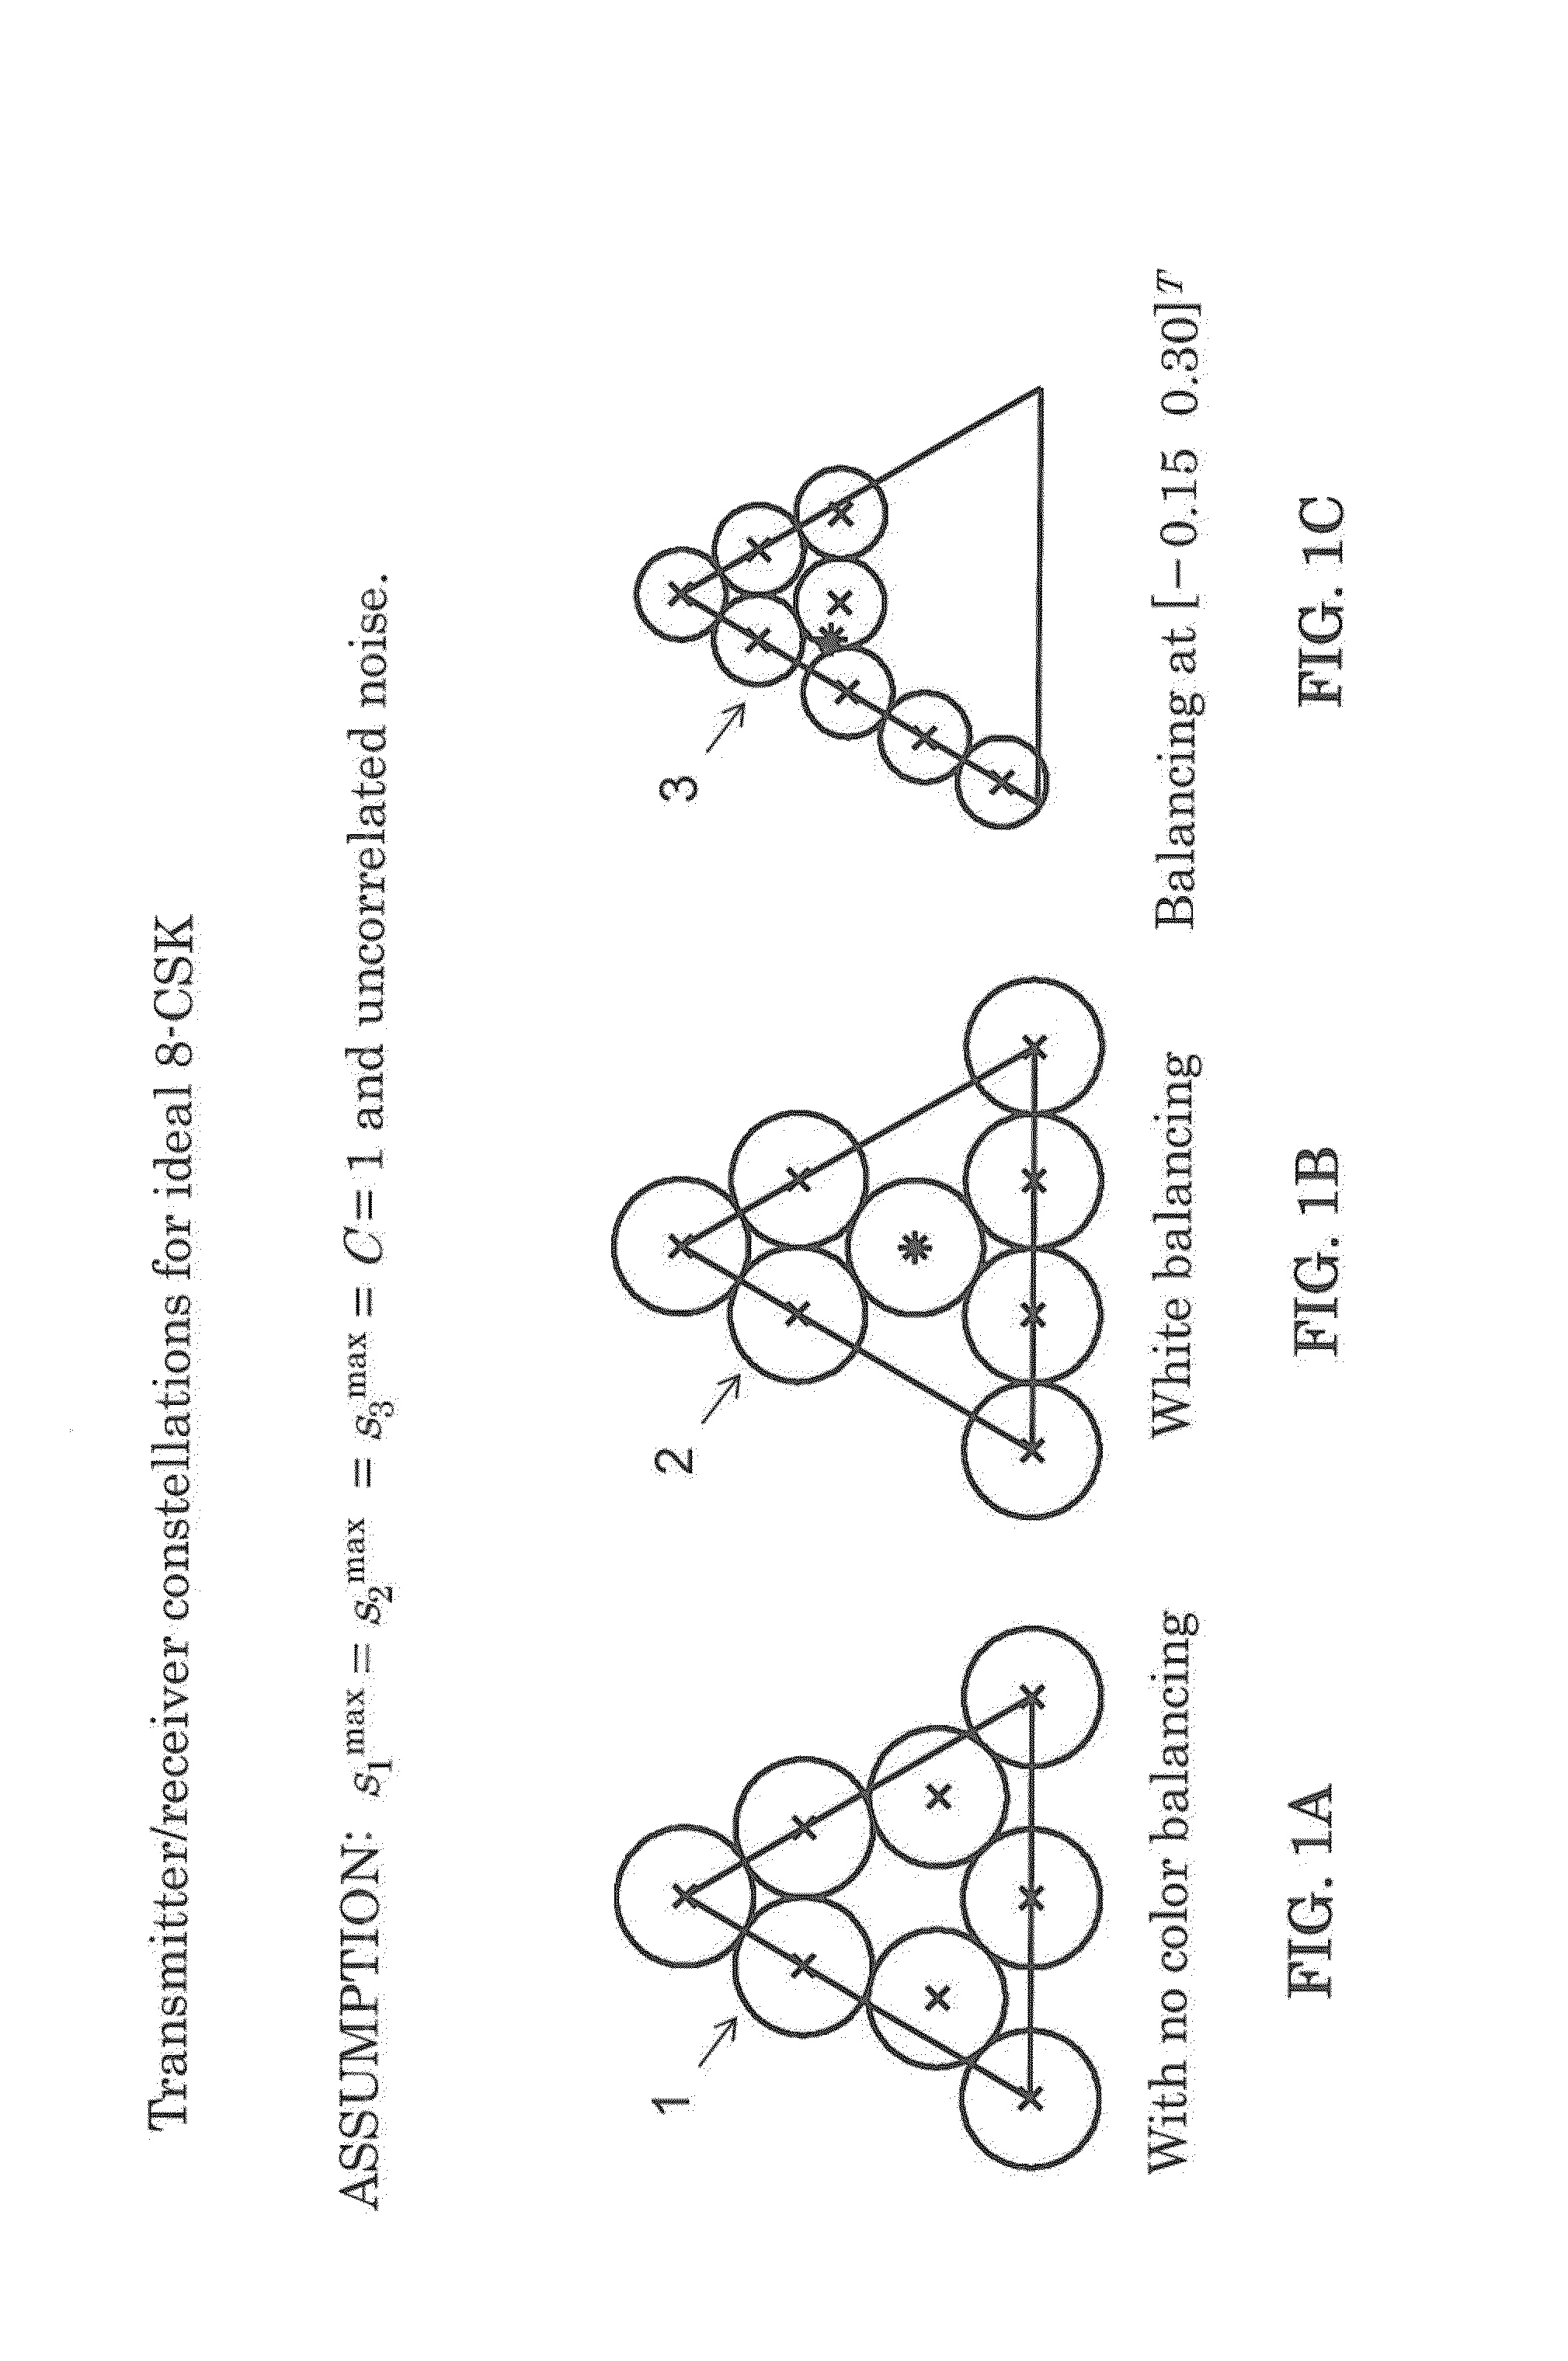 Method and System for Color-Shift Keying Using Algorithms